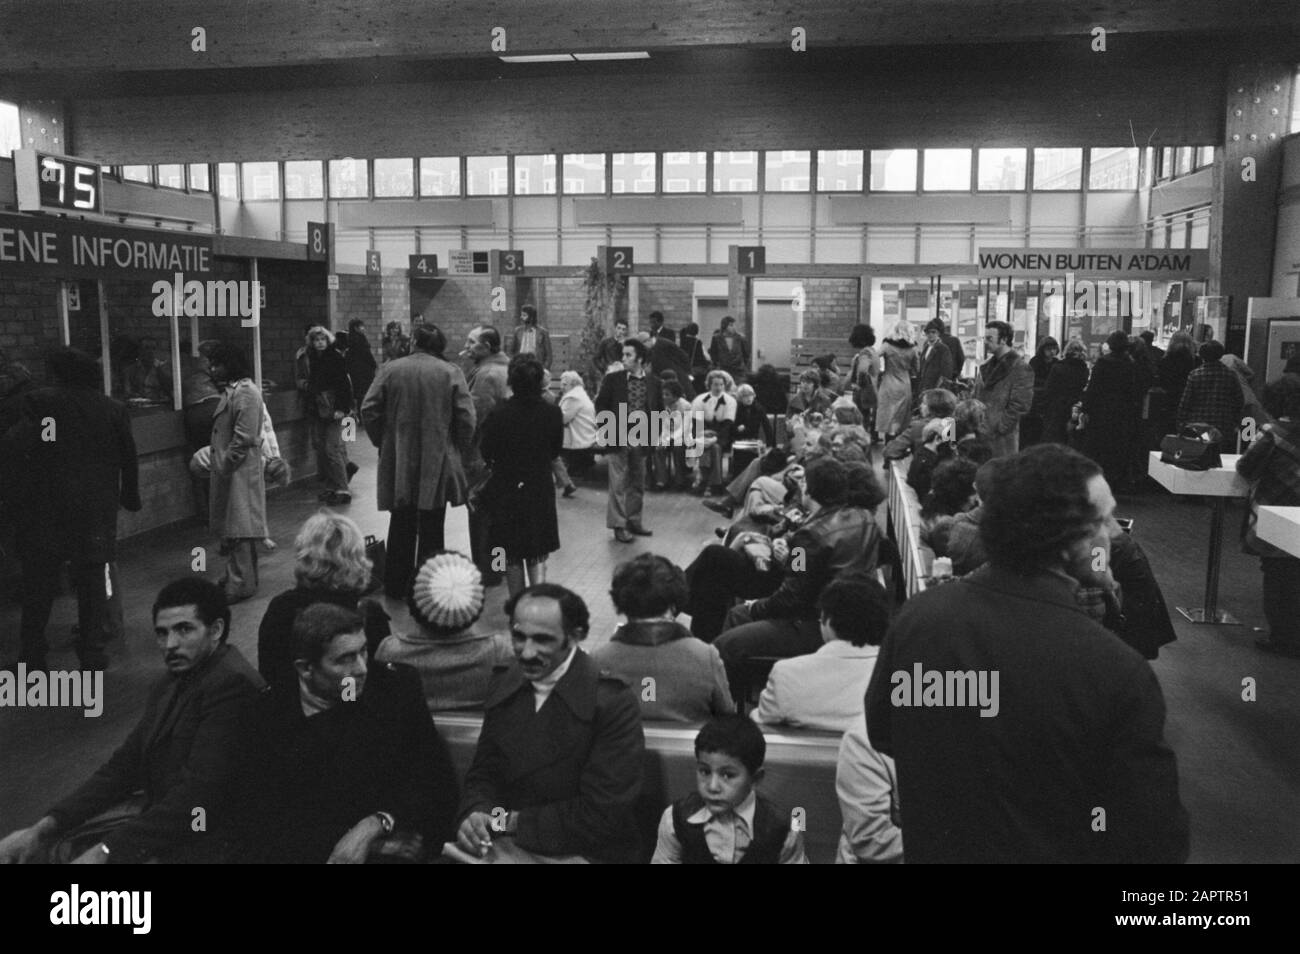 Large crowds at the service Re-housing in Amsterdam  housing, housing, housing associations Date: April 12, 1977 Location: Amsterdam, Noord-Holland Keywords: housing, housing associations, housing associations housing Stock Photo